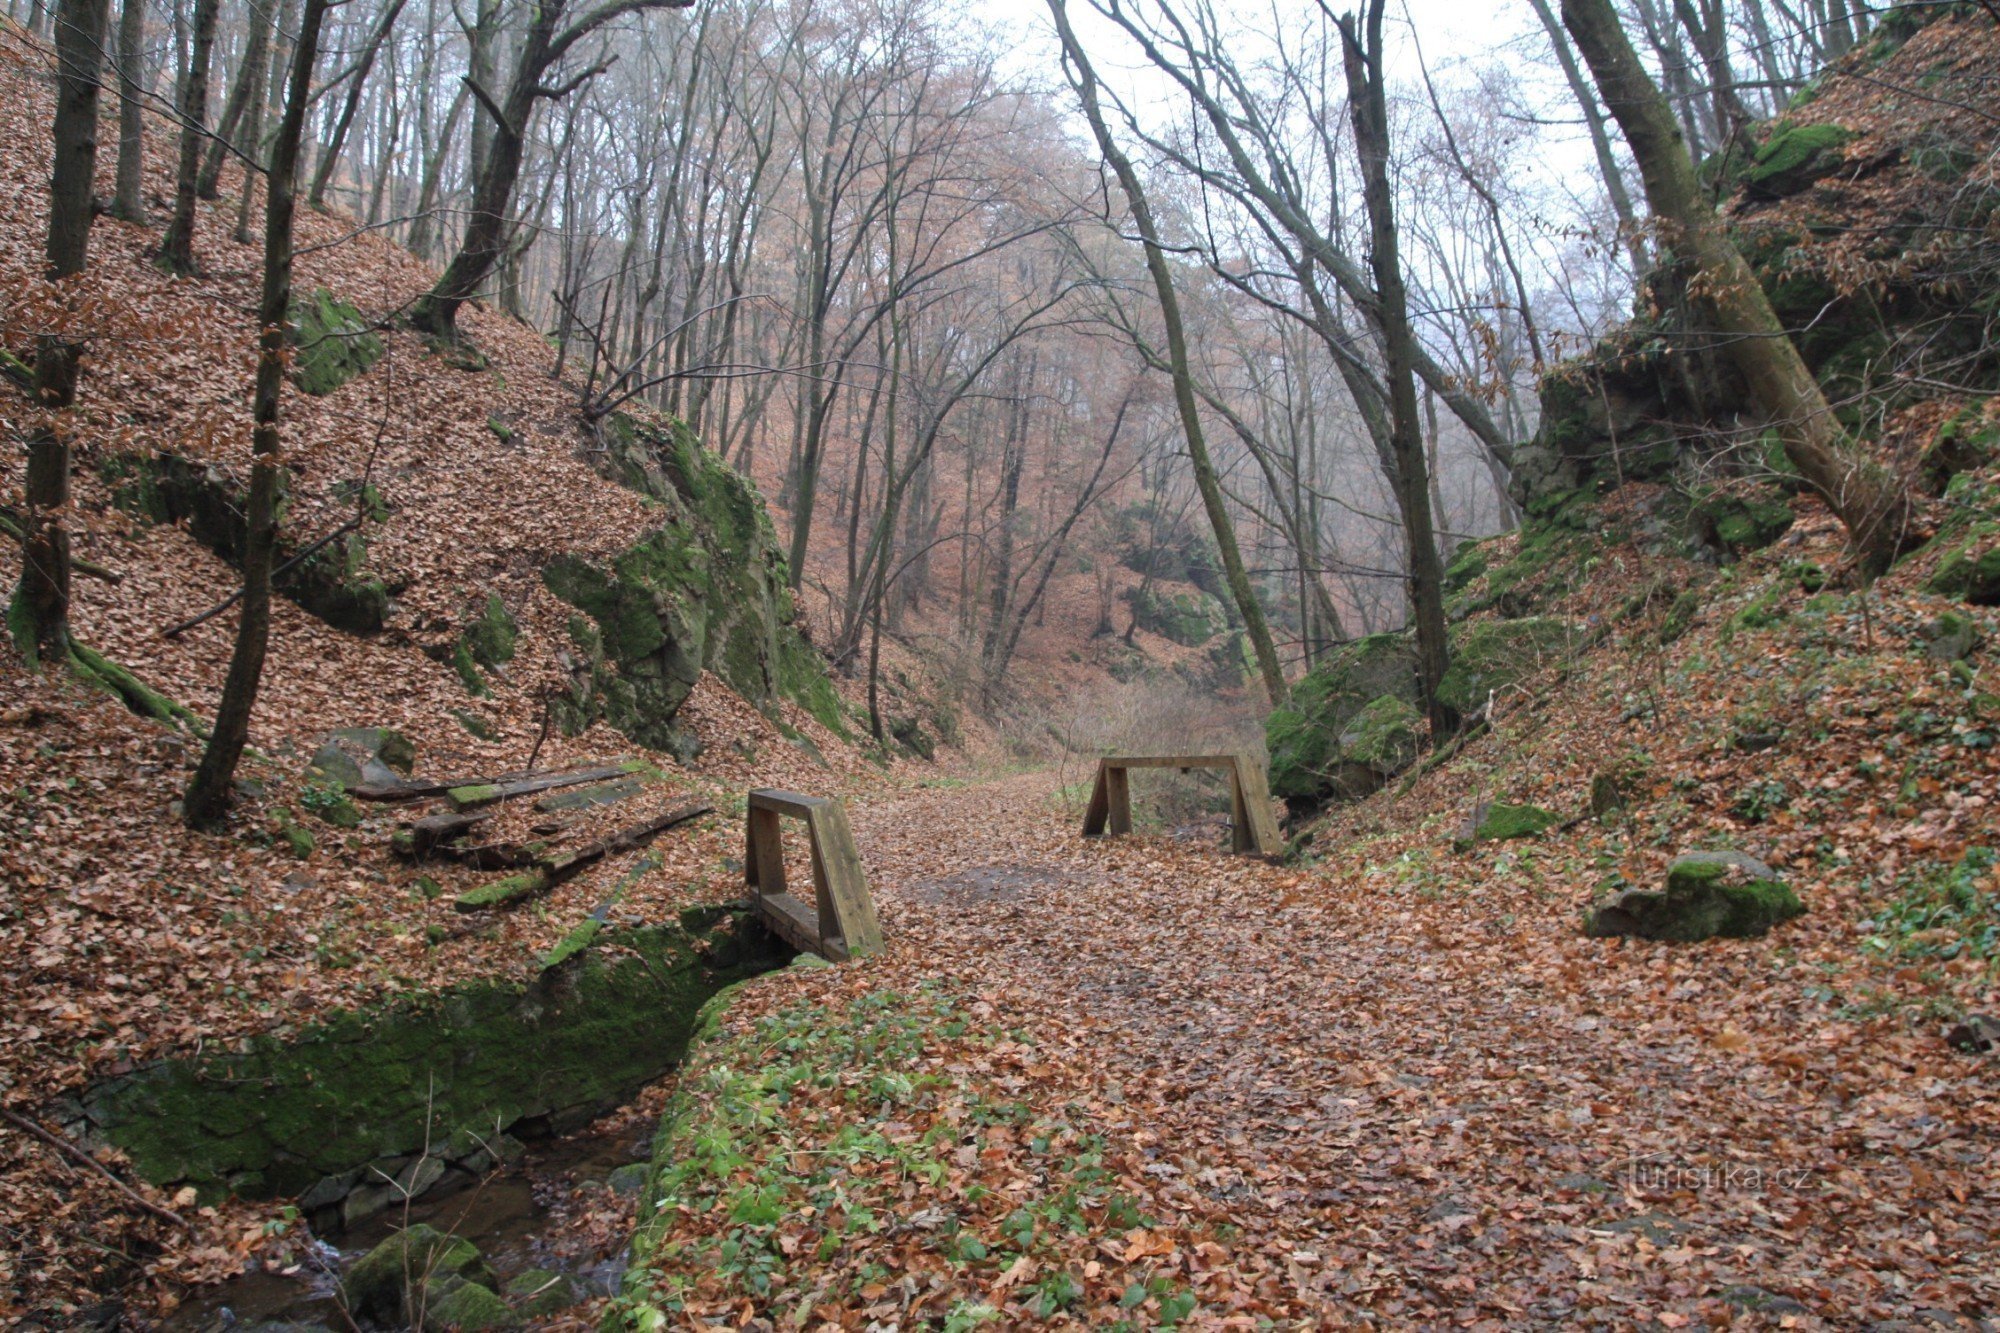 One of the wooden bridges on Gangloff's path